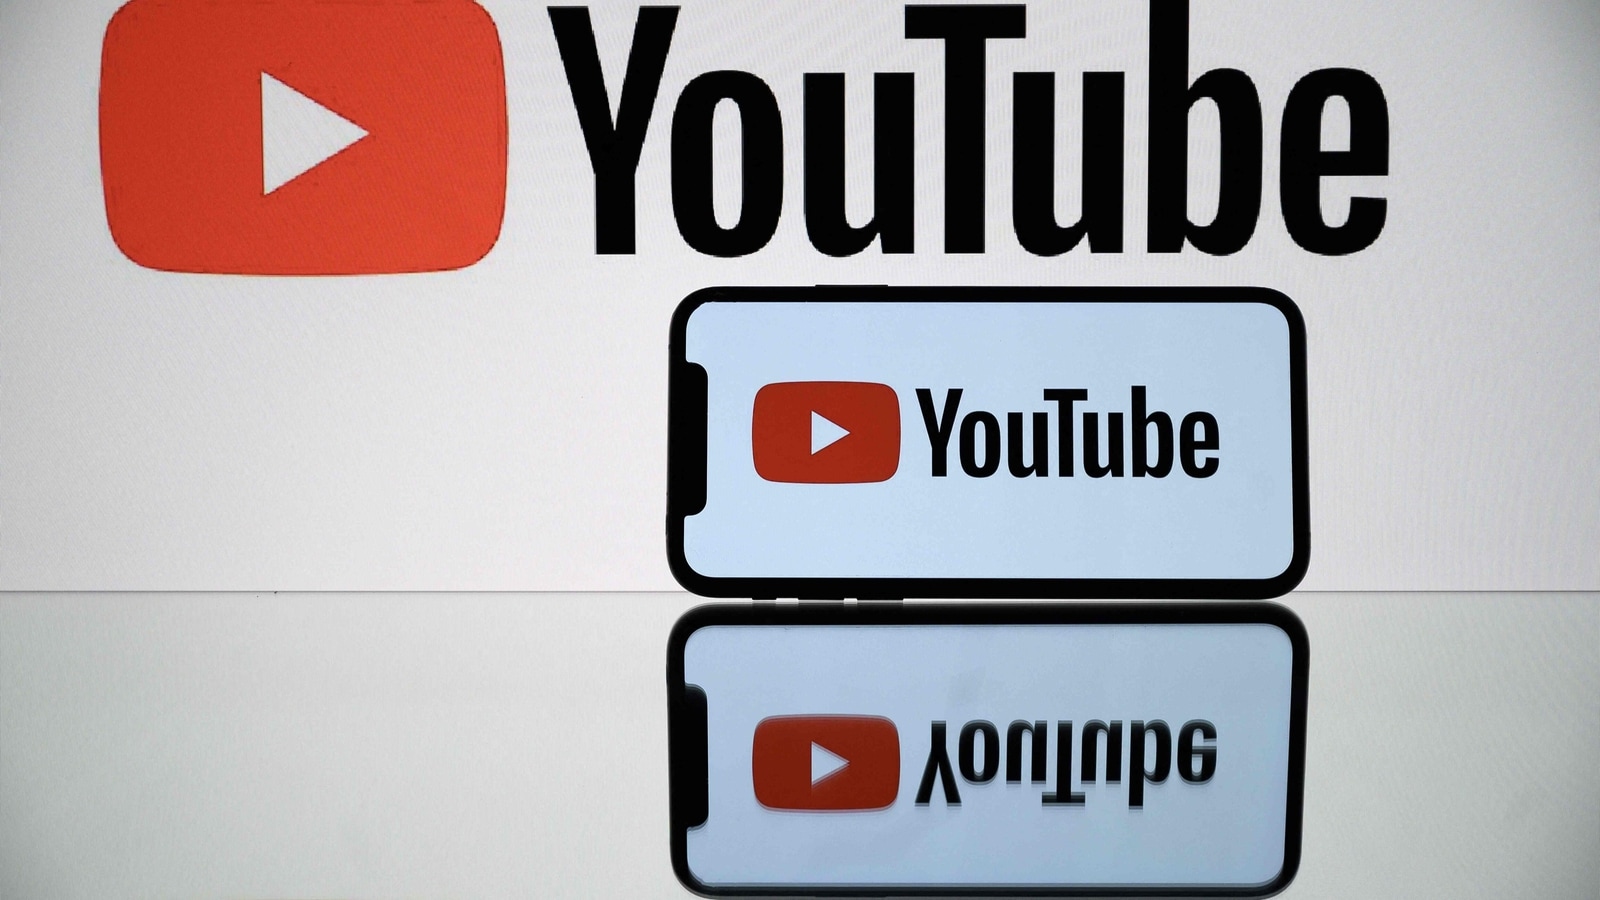 YouTube transcription feature for videos launched by Google - HT Tech